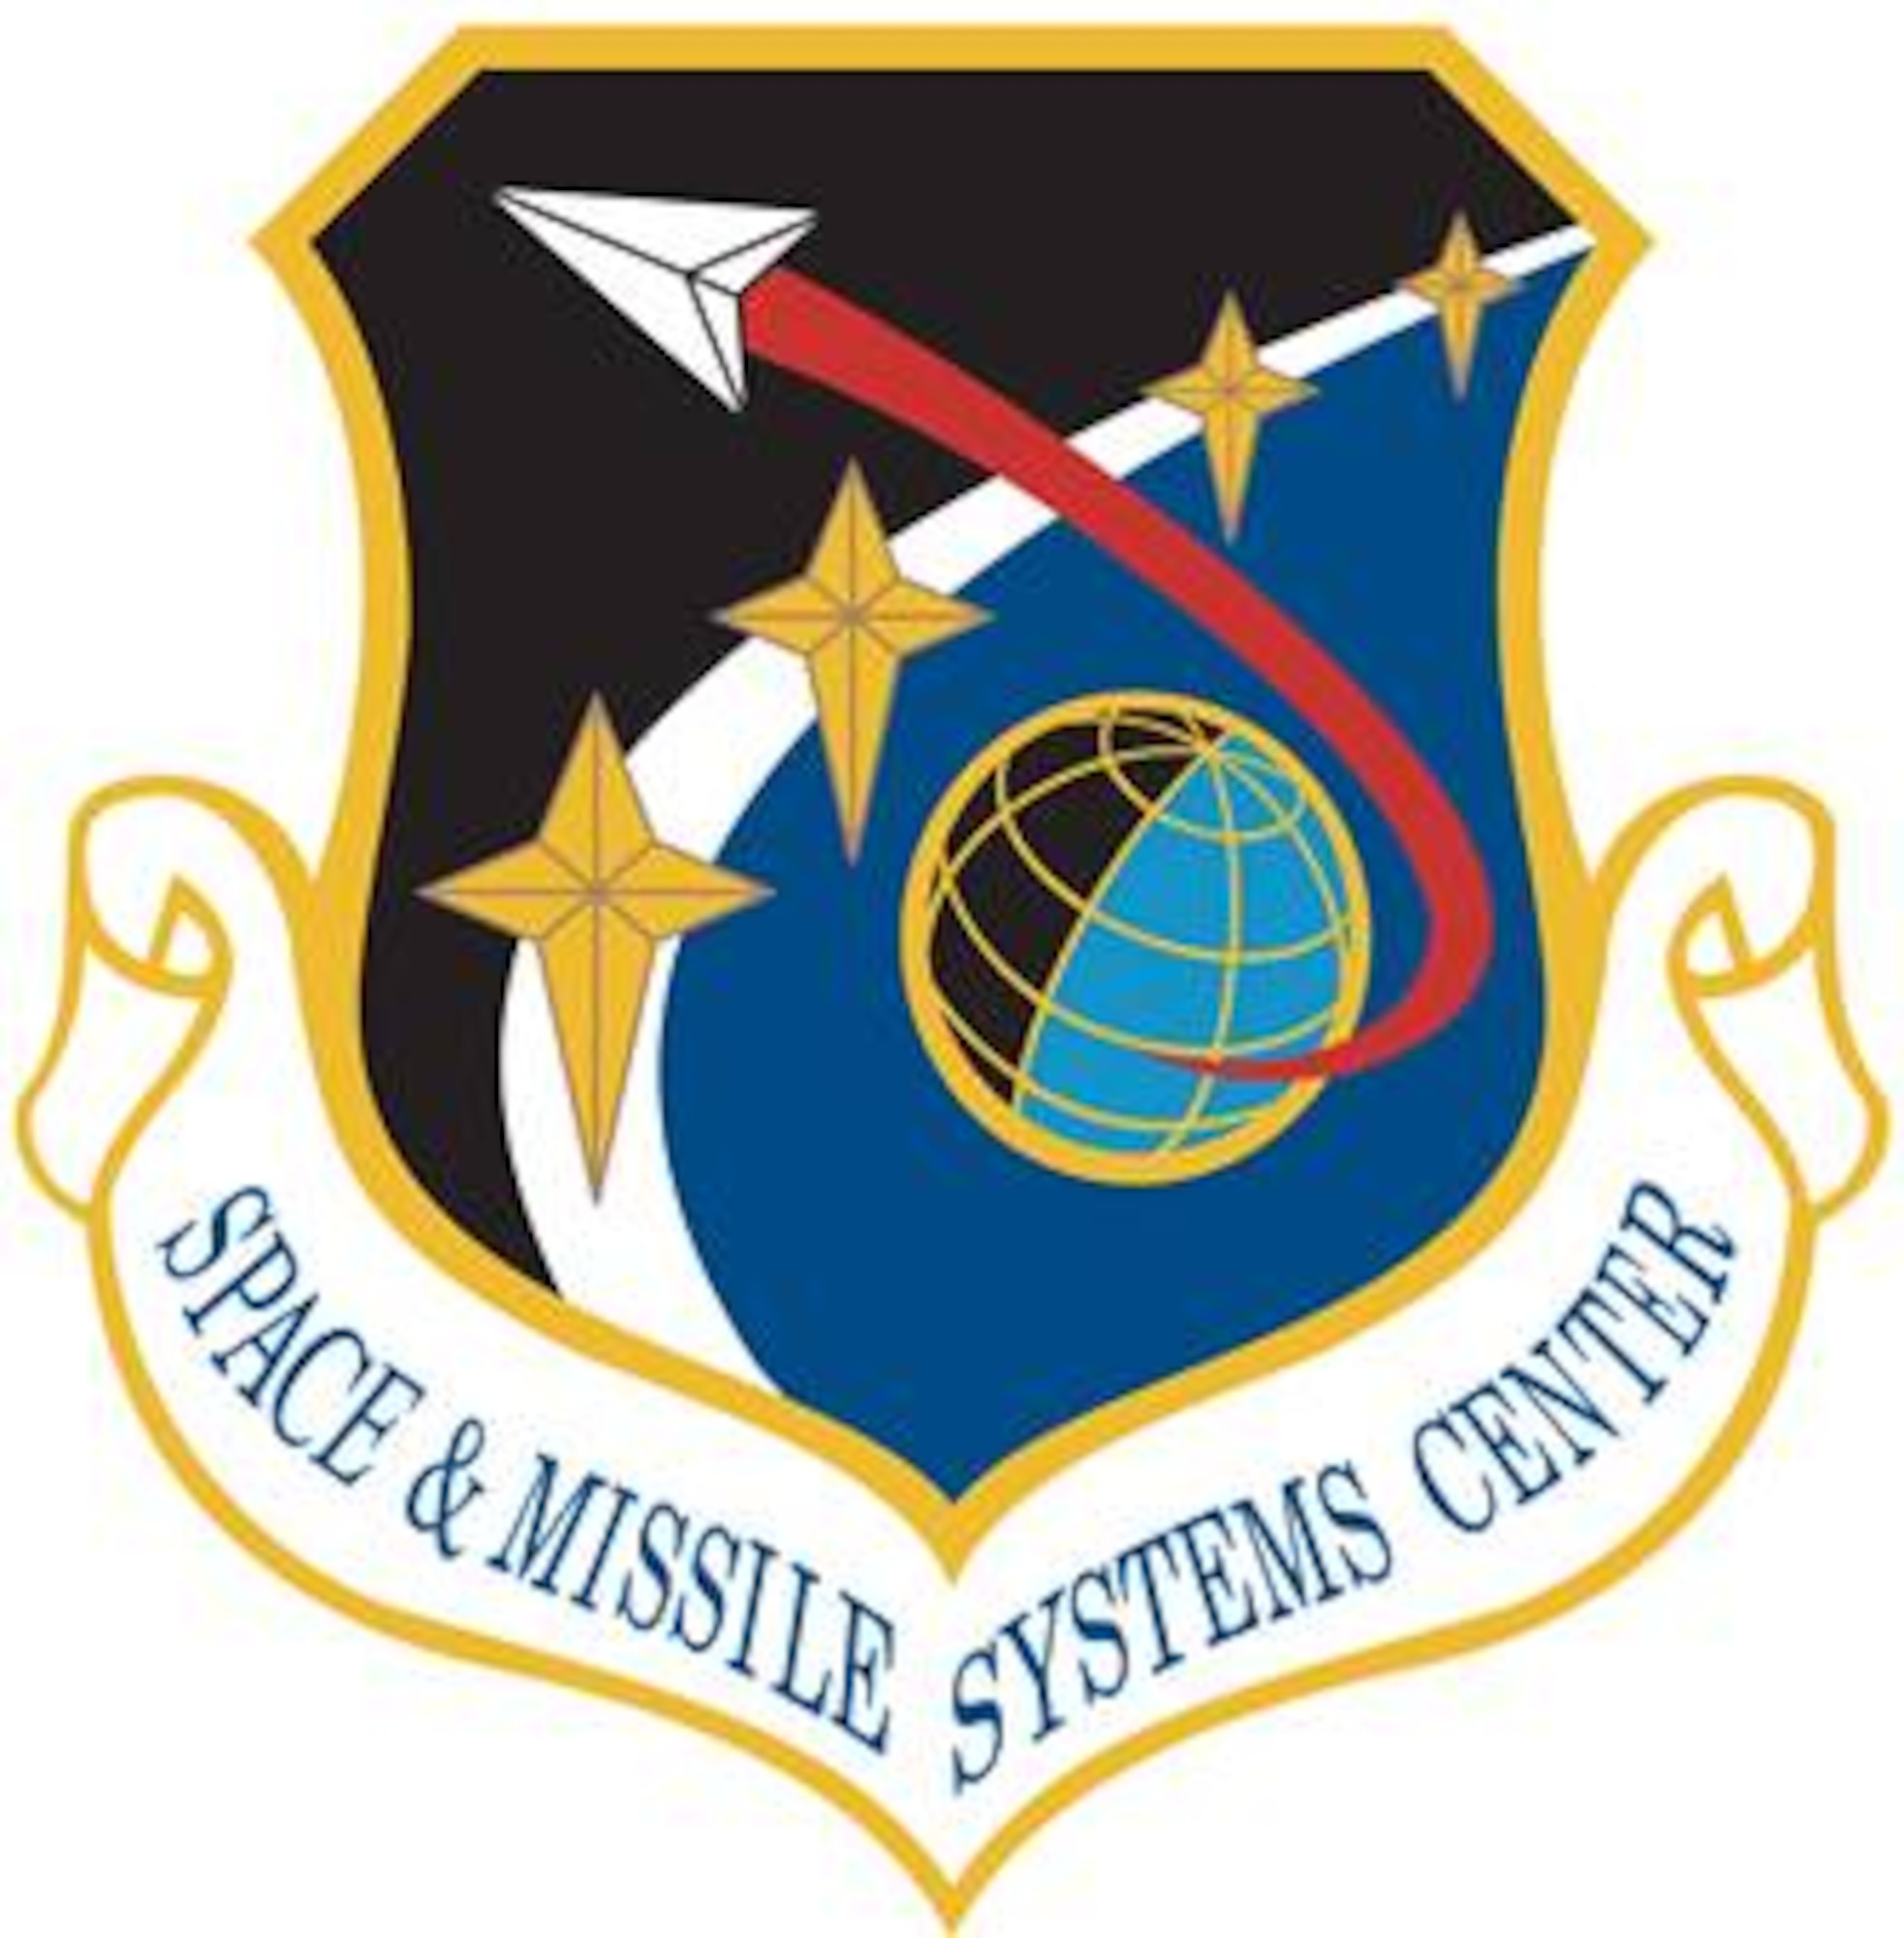 Space & Missile Systems Center Shield (Color).  In accordance with Chapter 3 of AFI 84-105, commercial reproduction of this emblem is NOT permitted without the permission of the proponent organizational/unit commander. Image provided by HQ, AFSPC/PAC. Image is 8.2x8.4 inches @ 300 ppi 